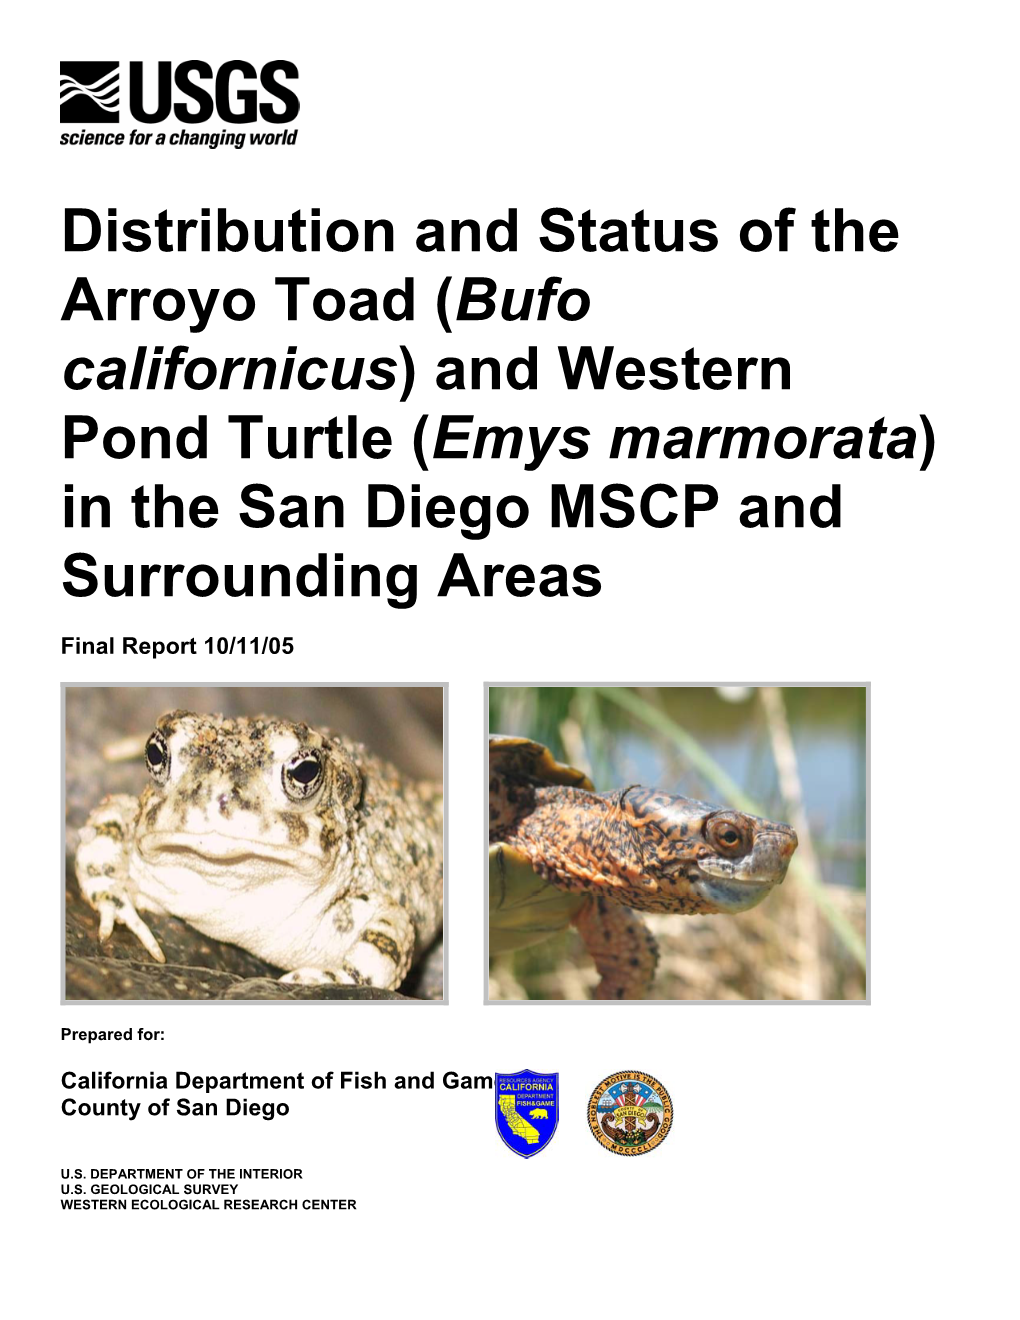 Distribution and Status of the Arroyo Toad (Bufo Californicus) and Western Pond Turtle (Emys Marmorata) in the San Diego MSCP and Surrounding Areas